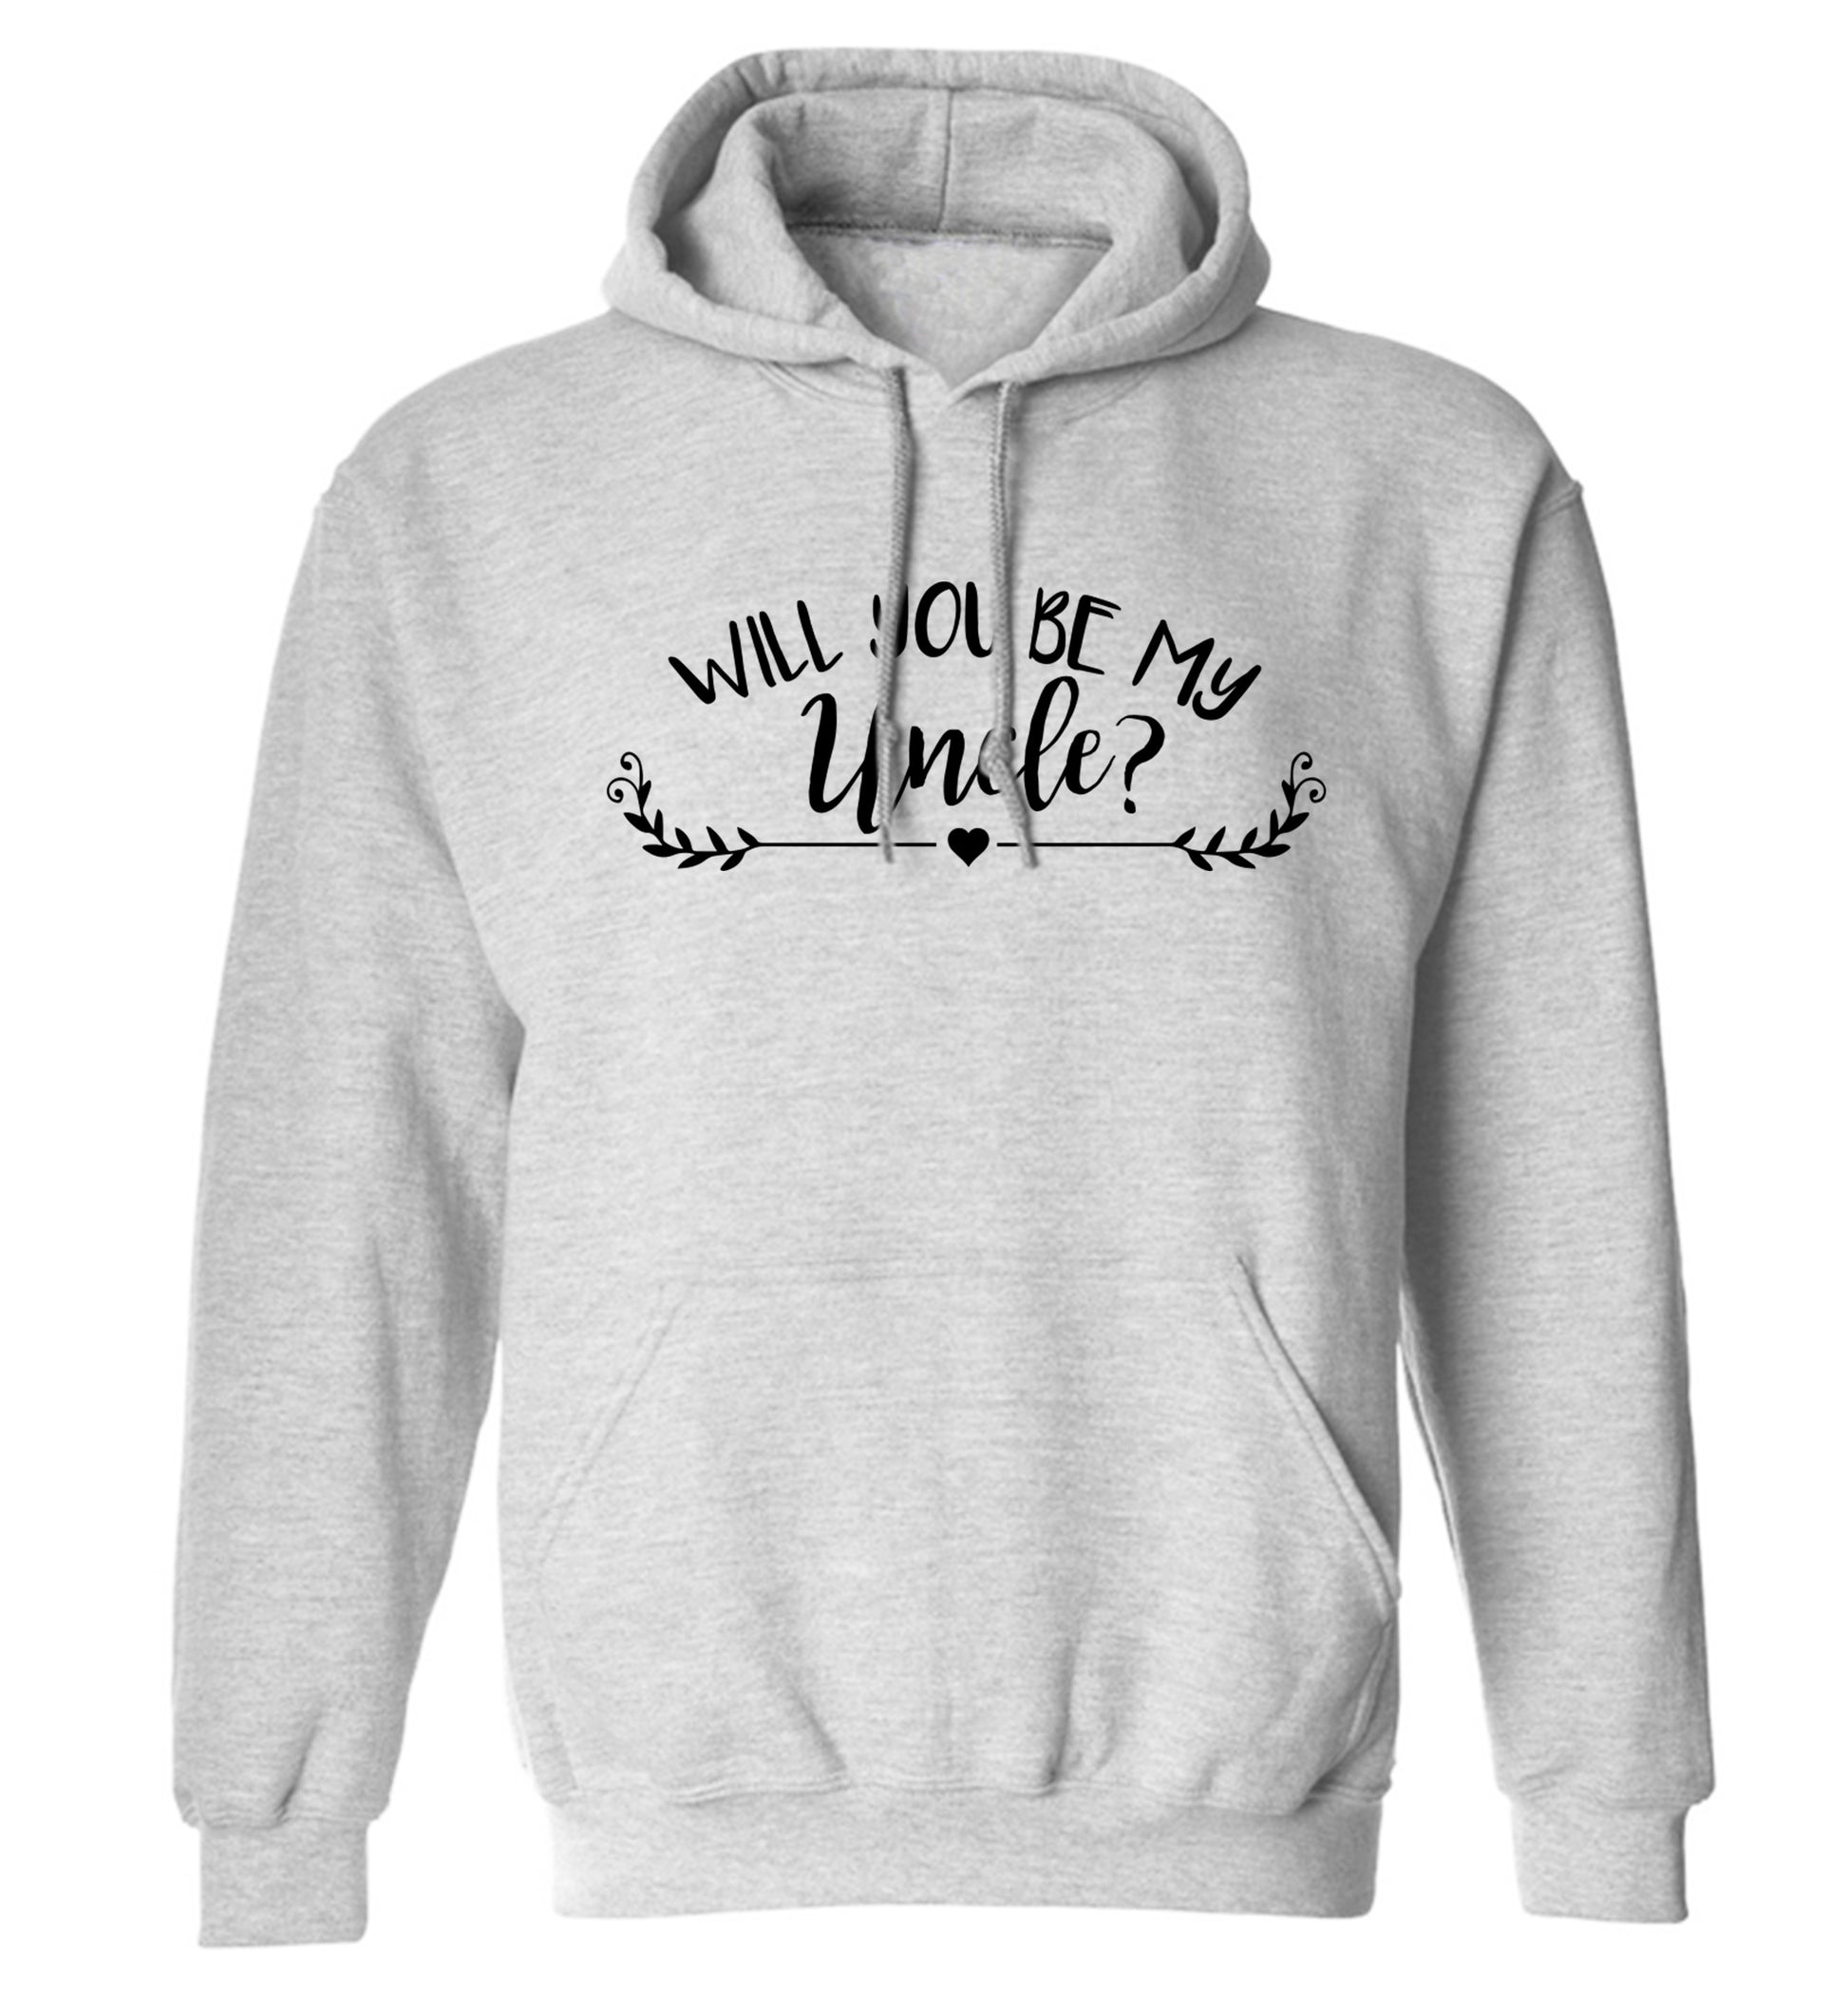 Will you be my uncle? adults unisex grey hoodie 2XL